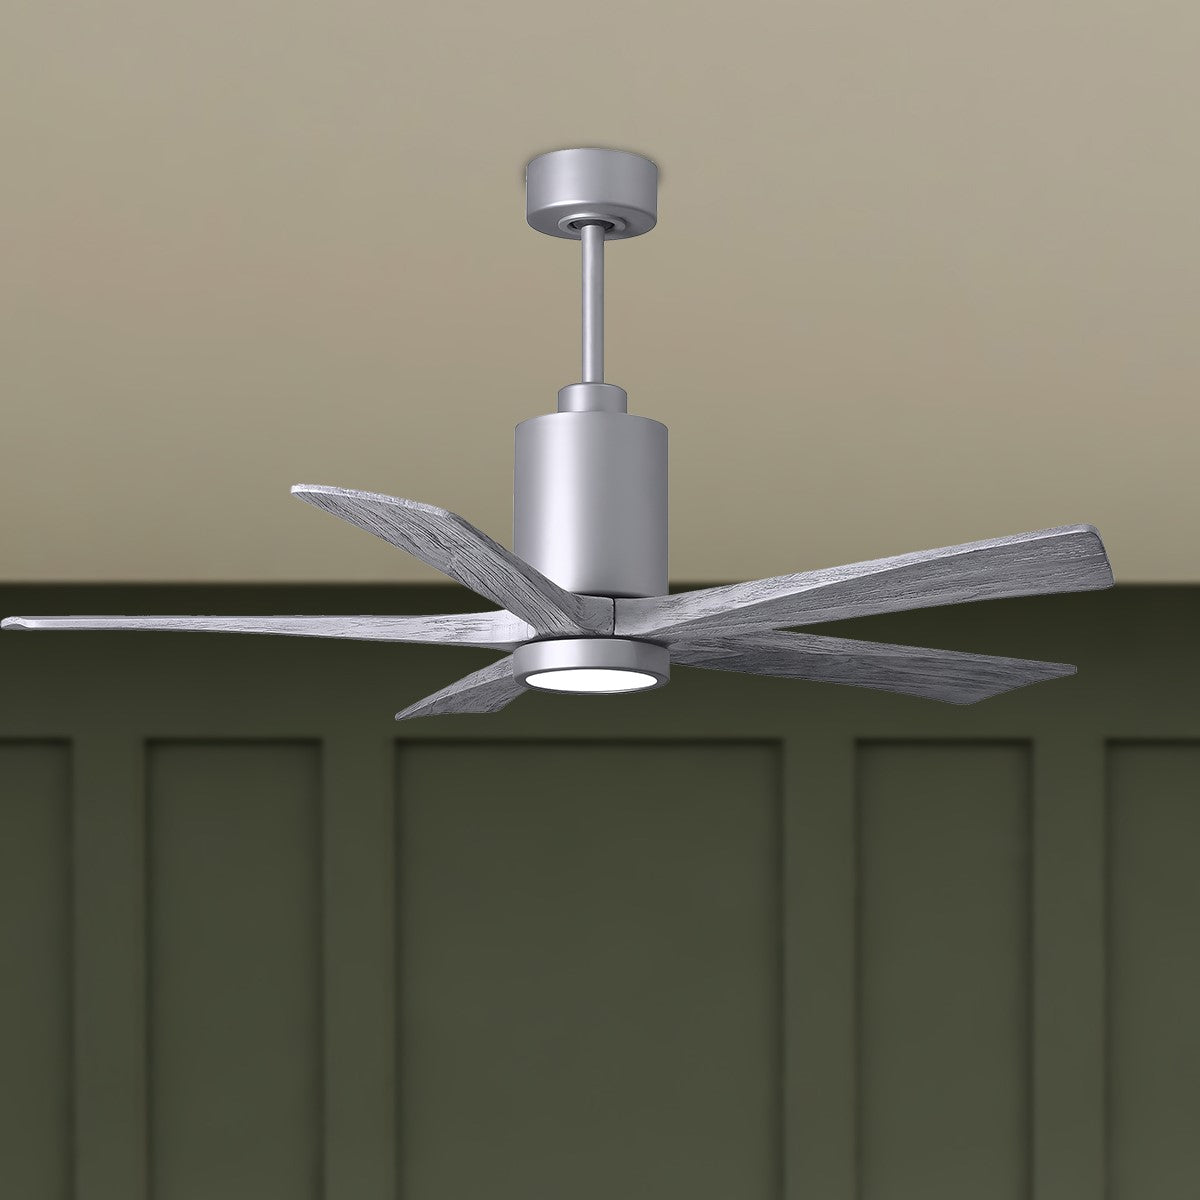 Patricia 52 Inch 5 Blades Modern Outdoor Ceiling Fan With Light, Wall And Remote Control Included - Bees Lighting